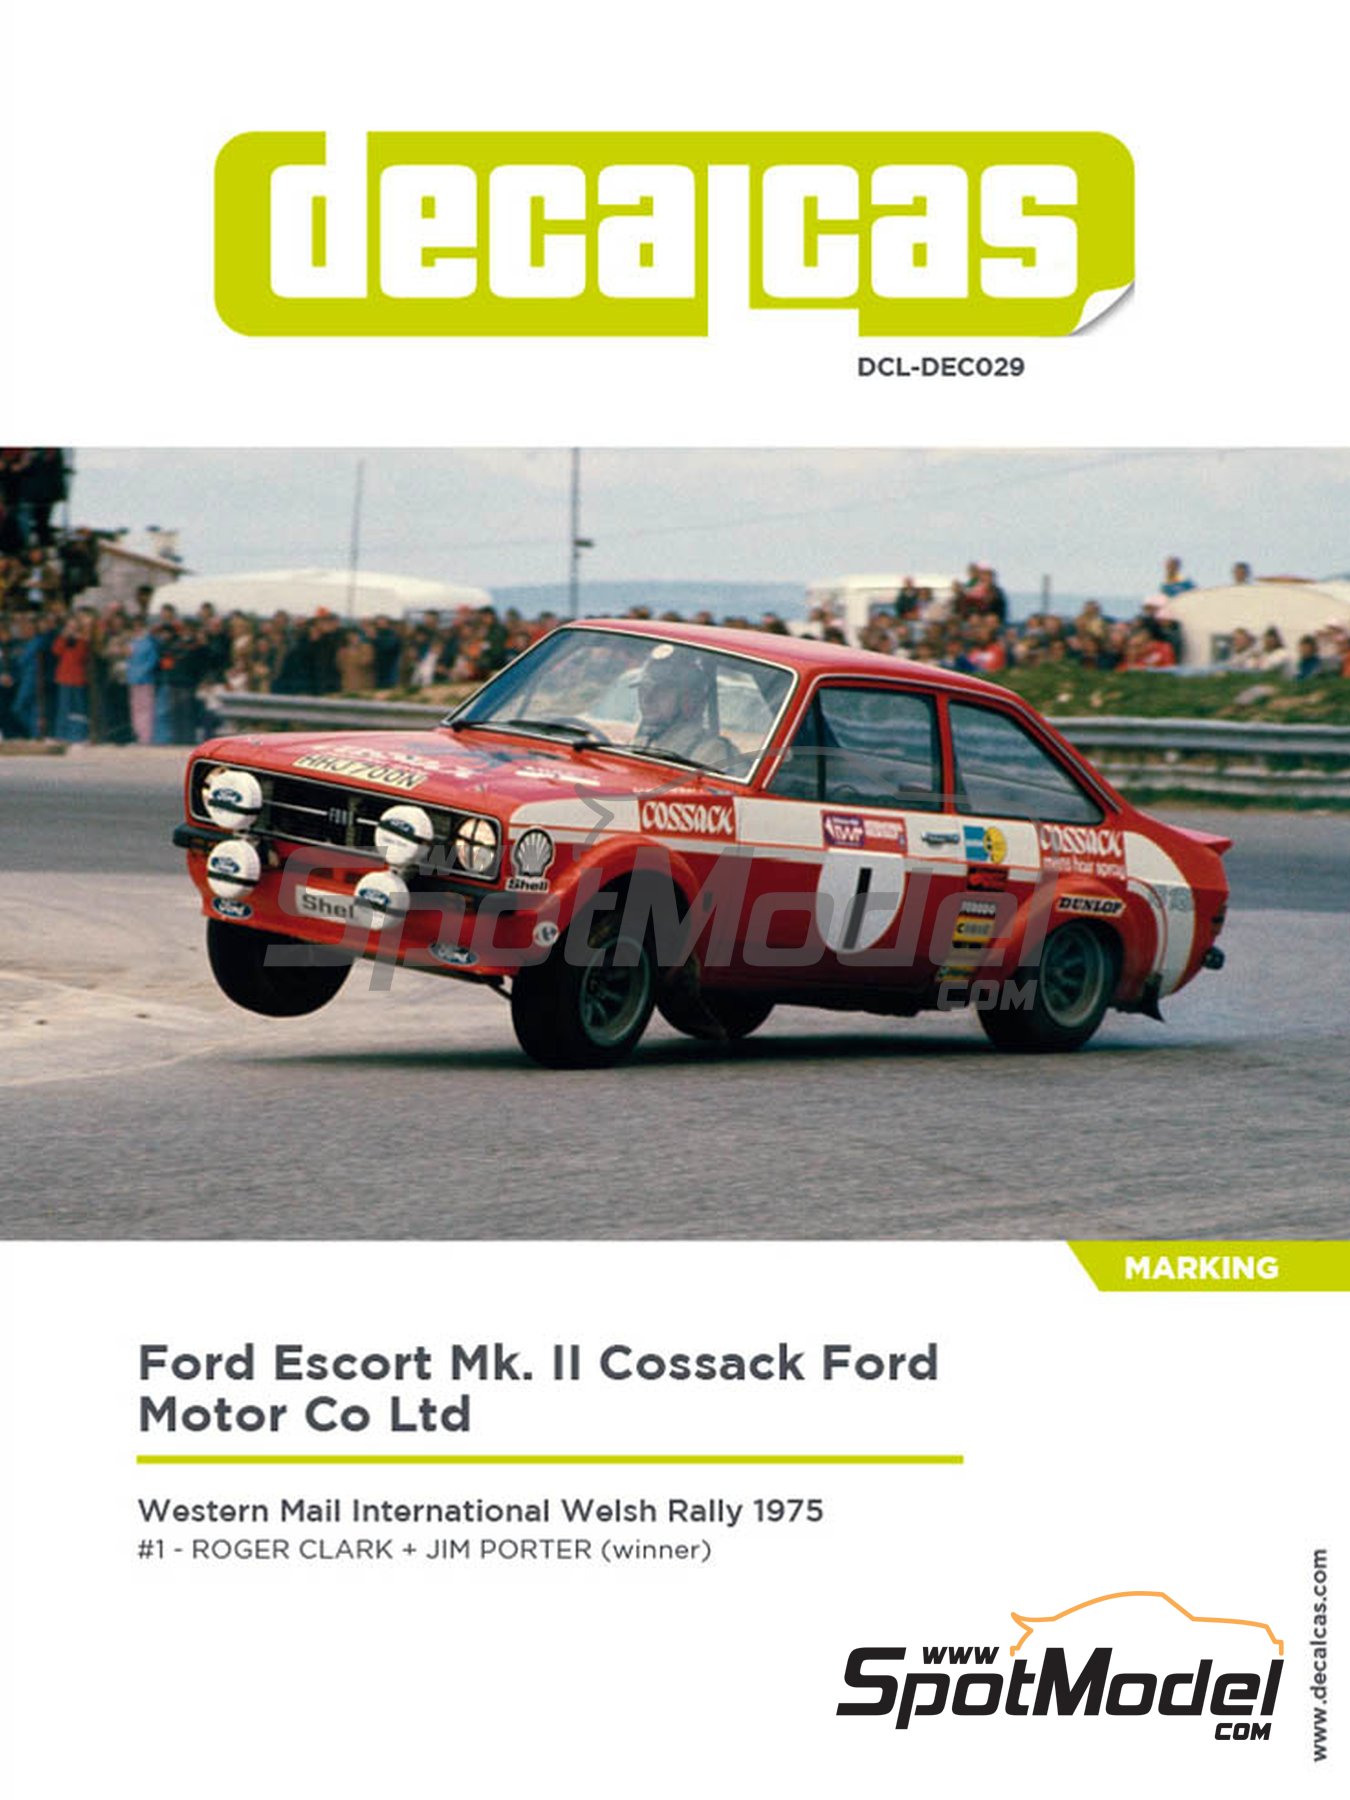 DECAL FORD ESCORT RS 1800 MKII M.WILSON C.OF IRELAND 1979 DnF 05